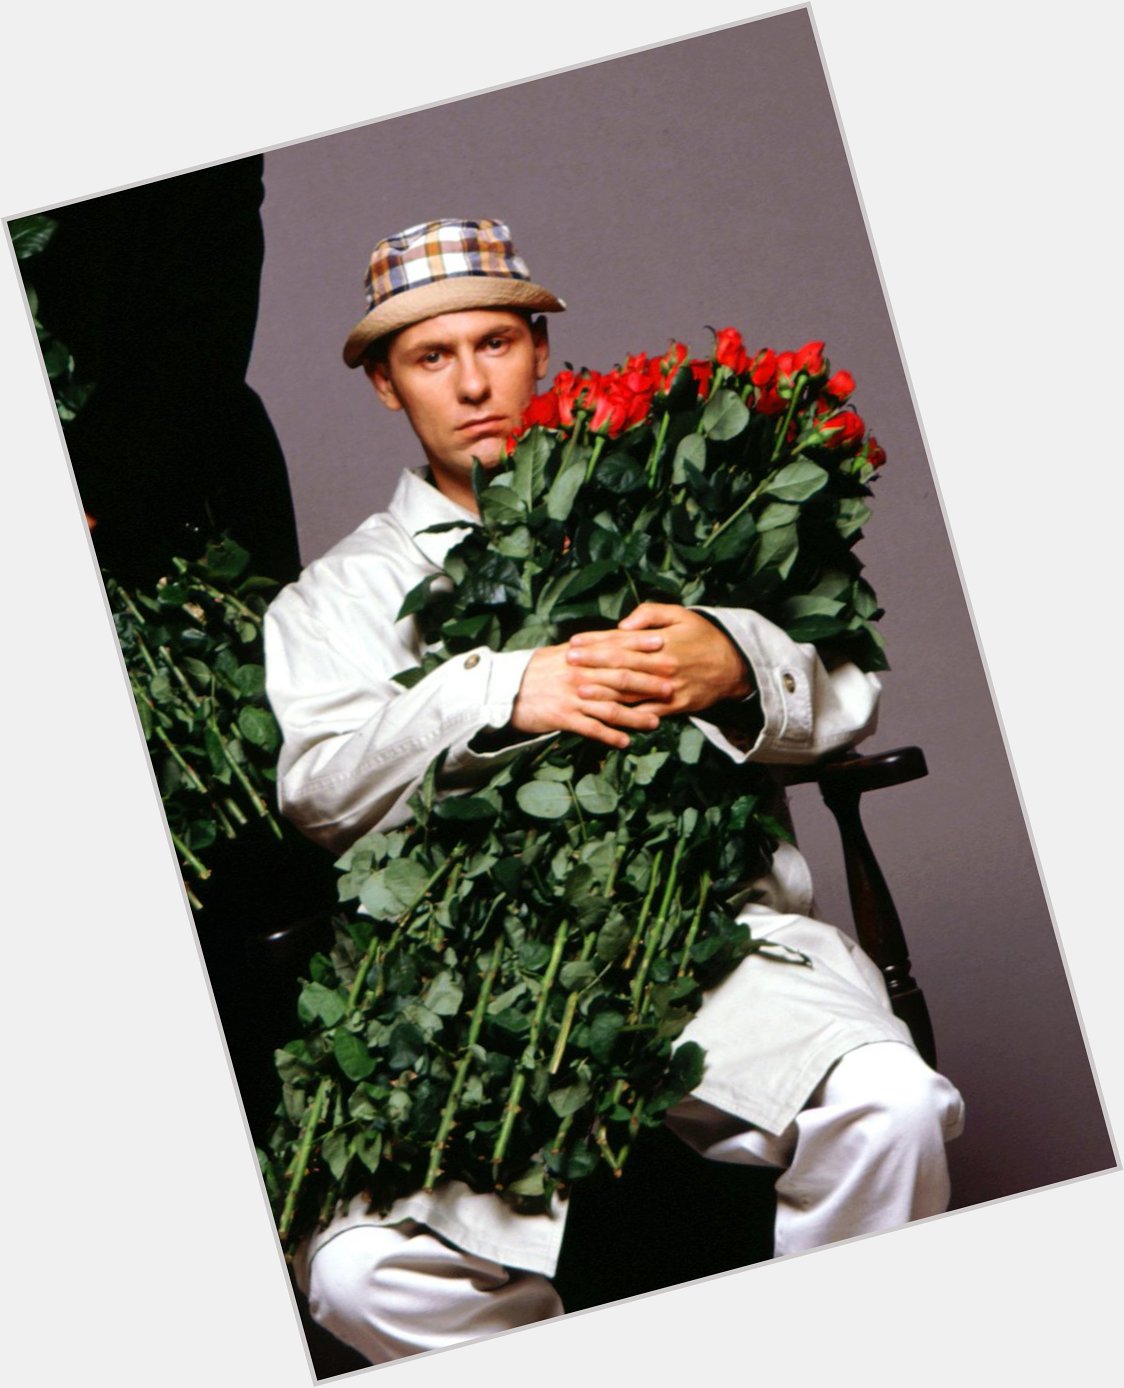 Happy 58th birthday to Chris Lowe from He\s ecstatic about getting his flowers! 